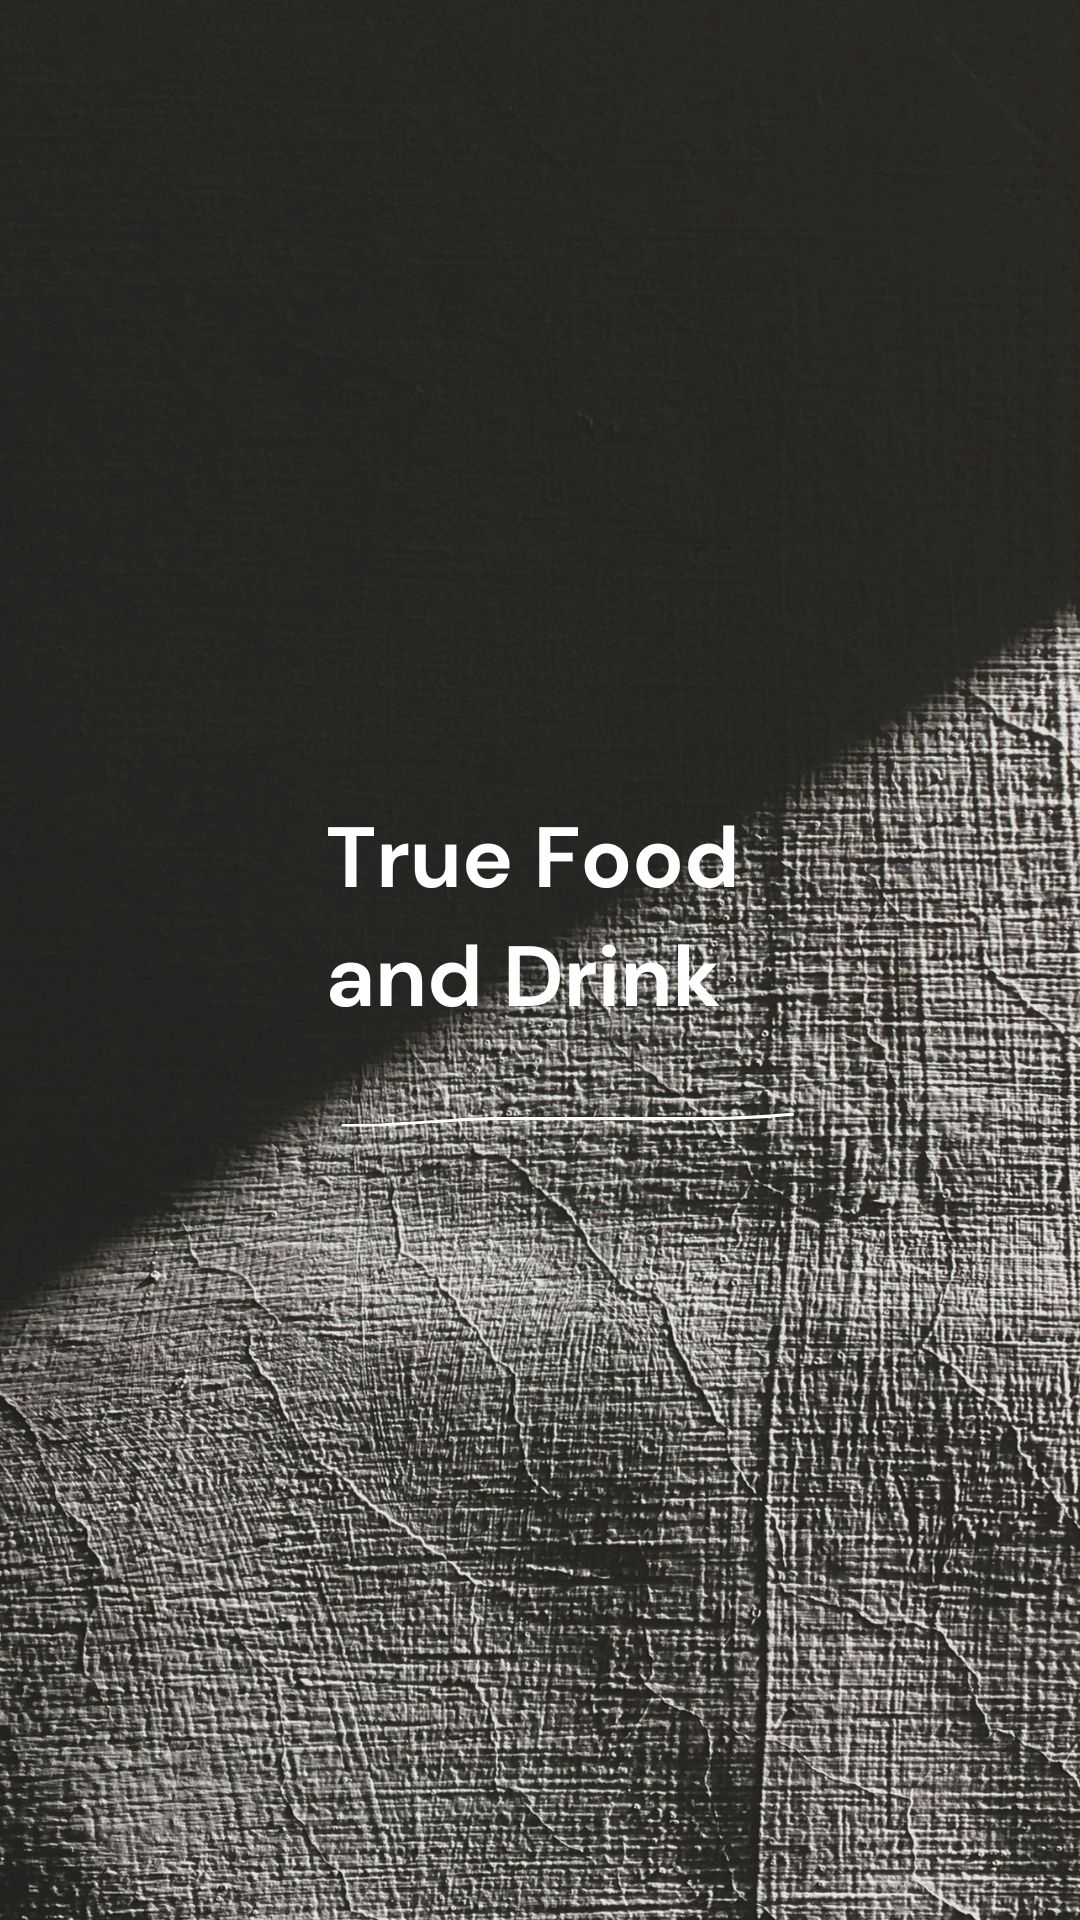 True Food and Drink
